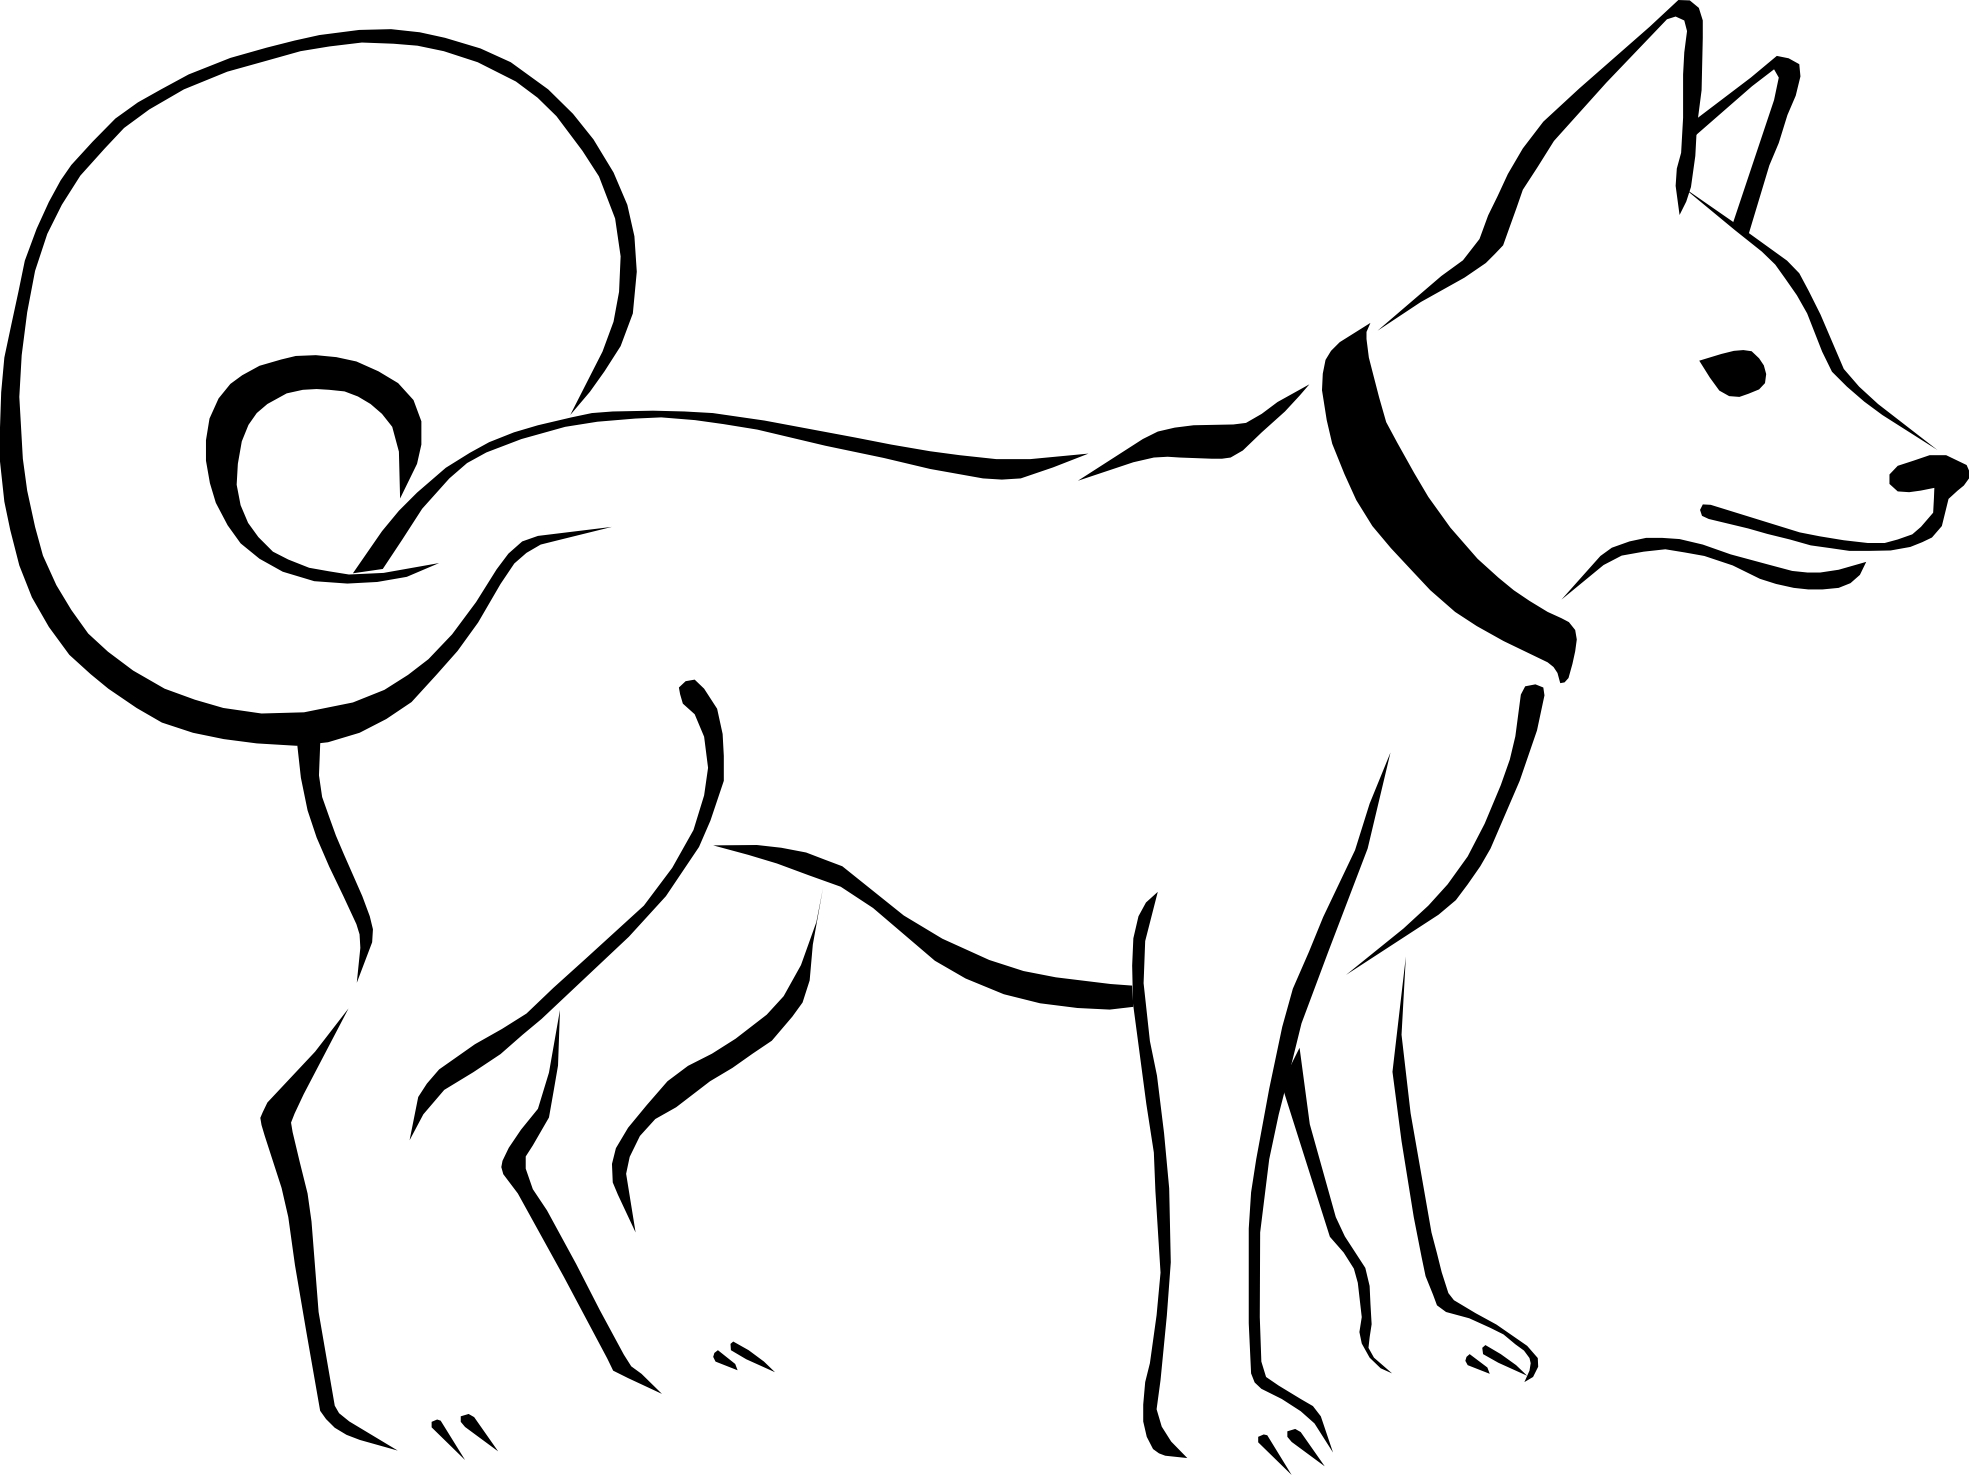 Dog  black and white dog clip art black and white free clipart images 3